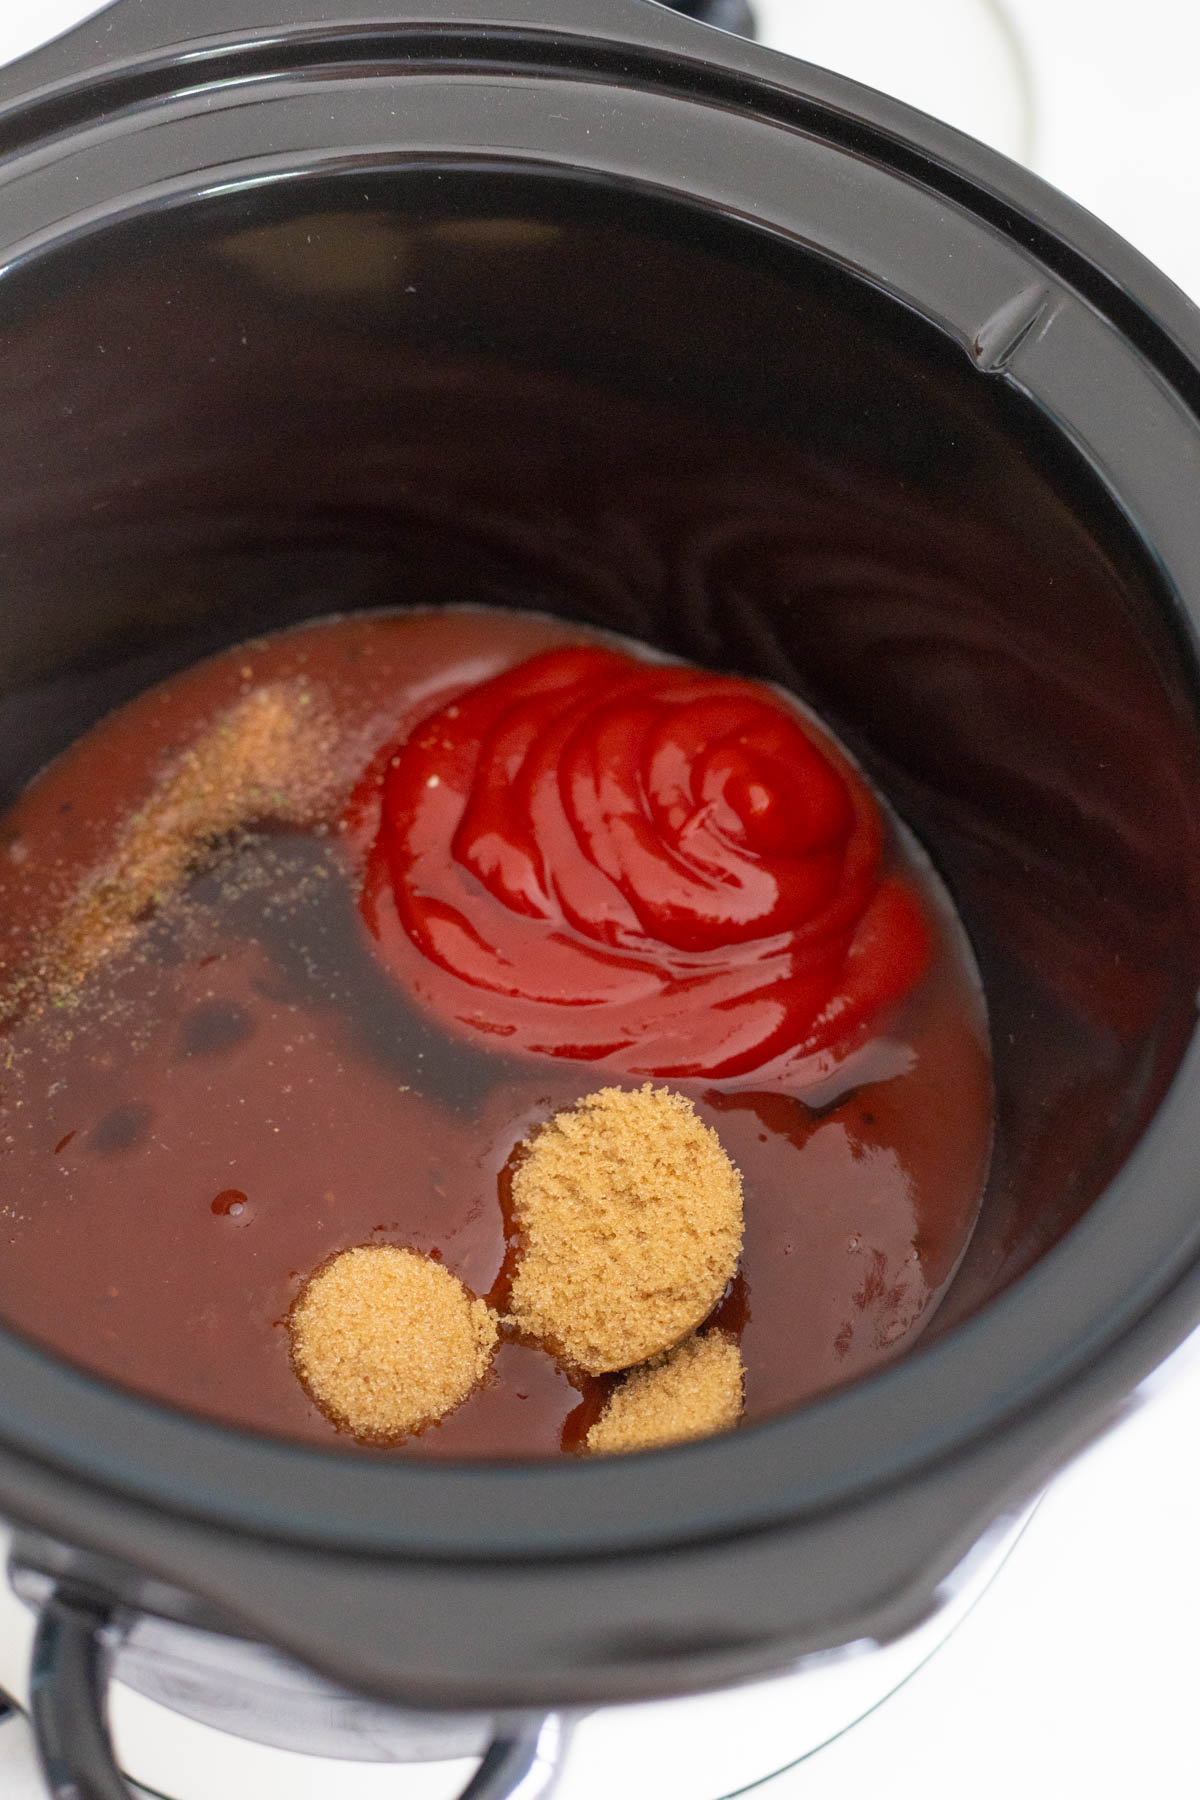 The ingredients for the tangy sauce are in the crockpot about to be stirred together.